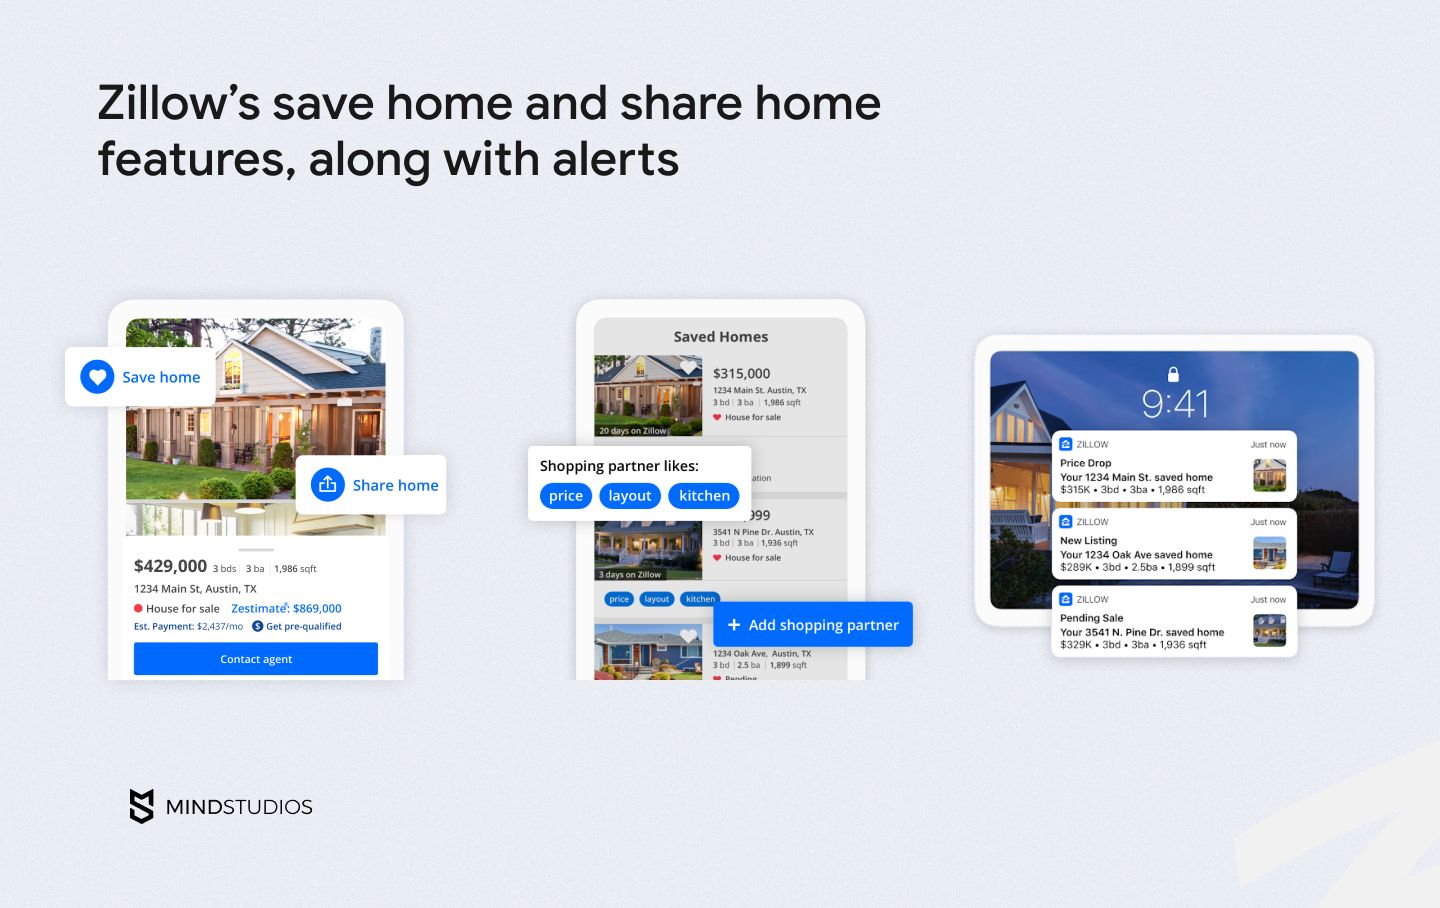 Zillow's save home